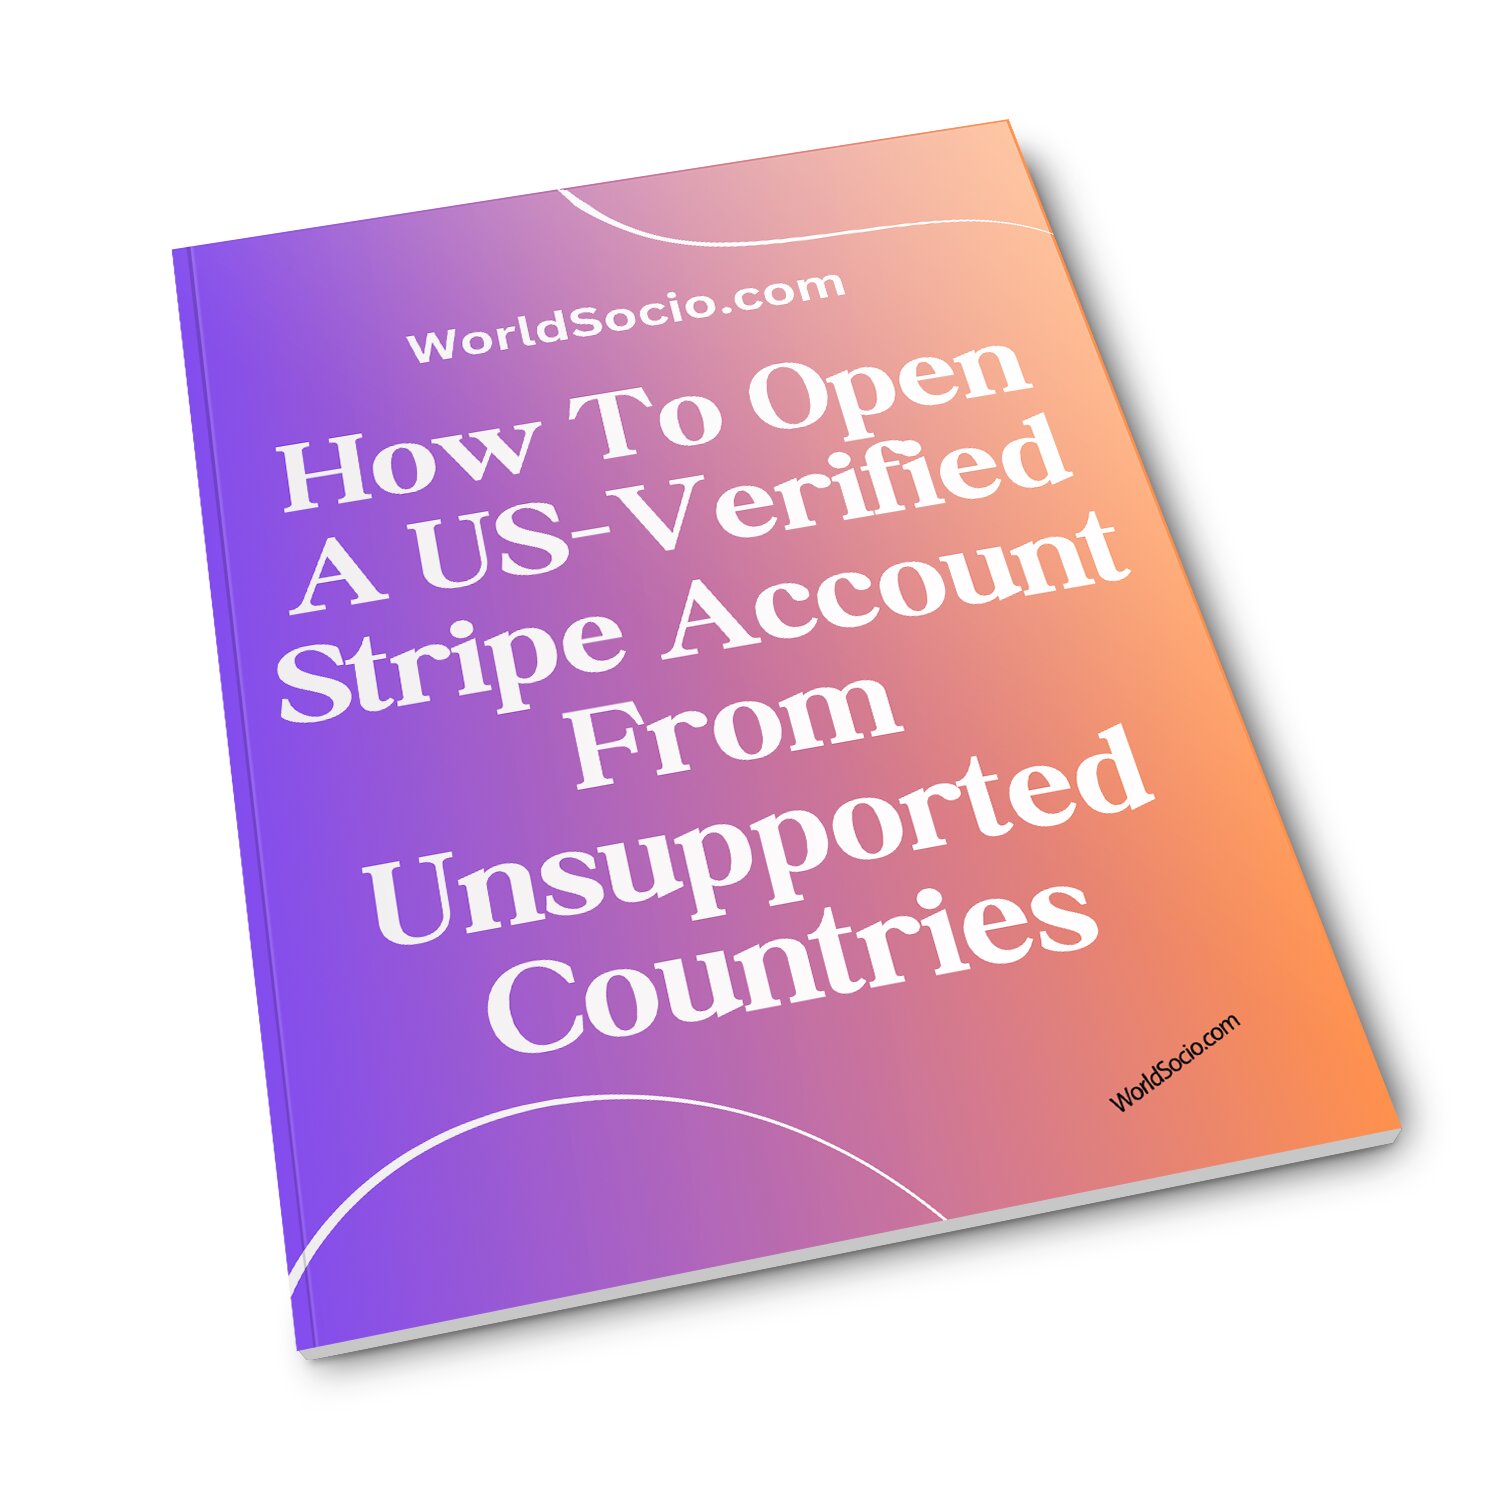 Step By Step How To Open A US-Verified Stripe Account From Unsupported Countries.jpg